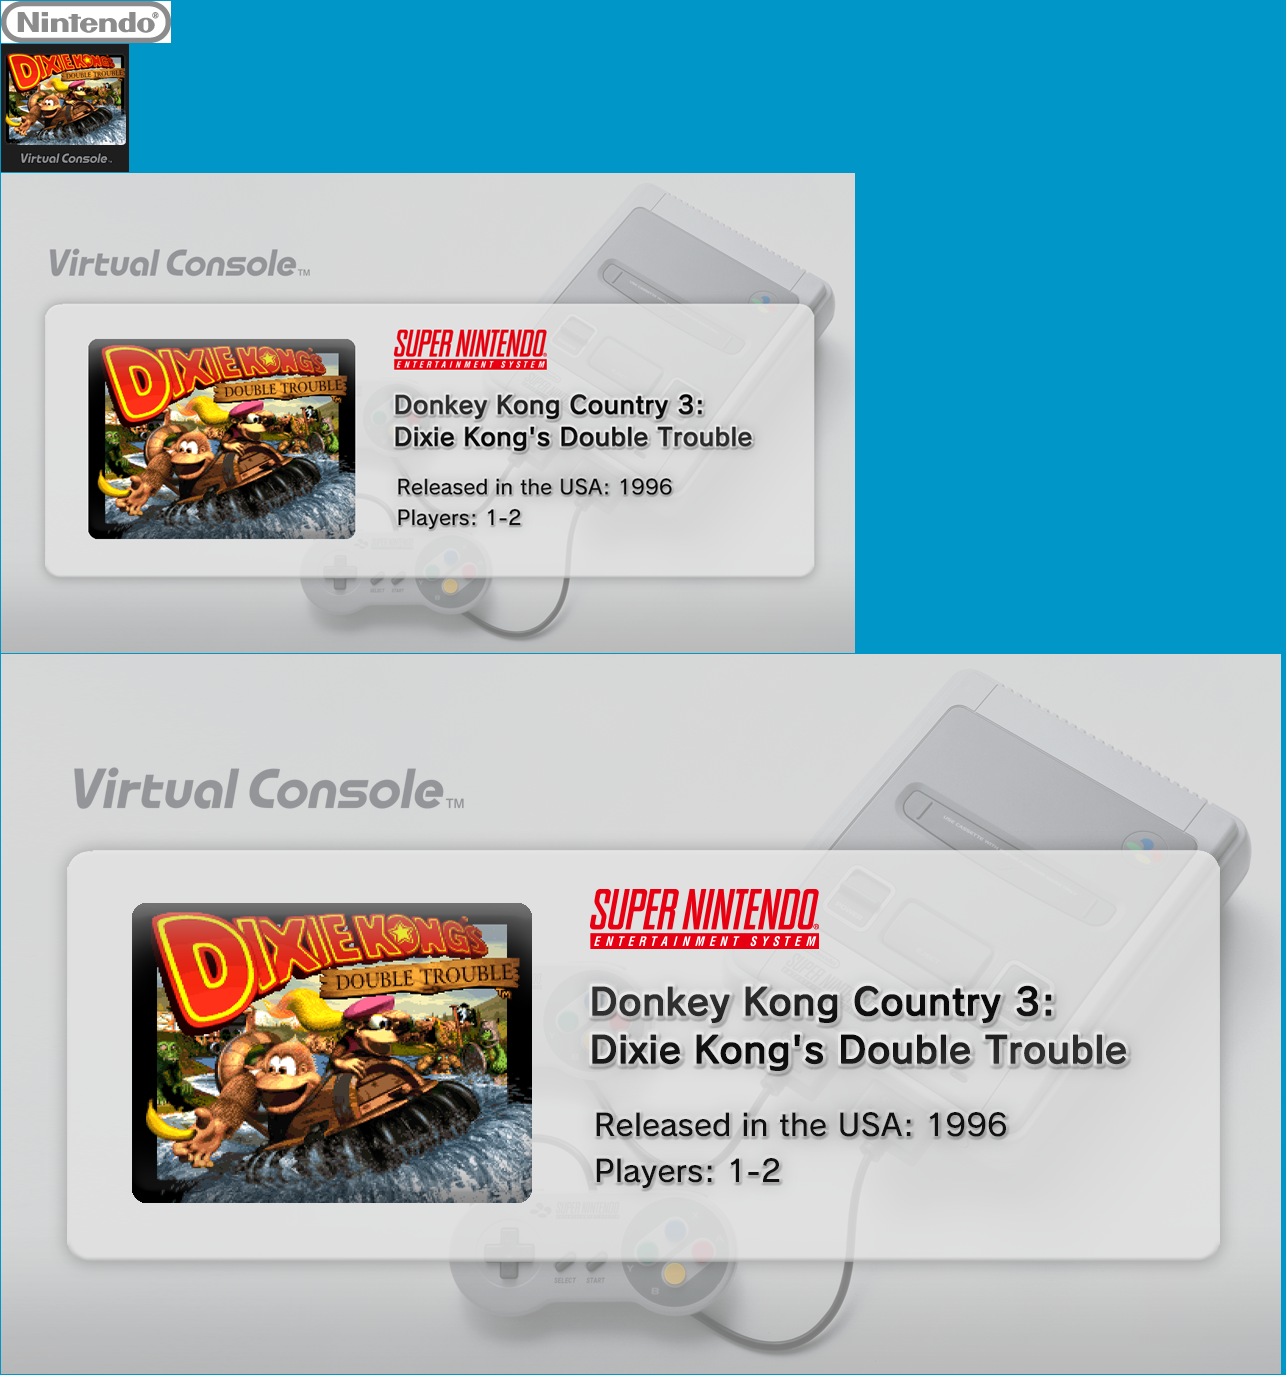 Virtual Console - Donkey Kong Country 3: Dixie Kong's Double Trouble